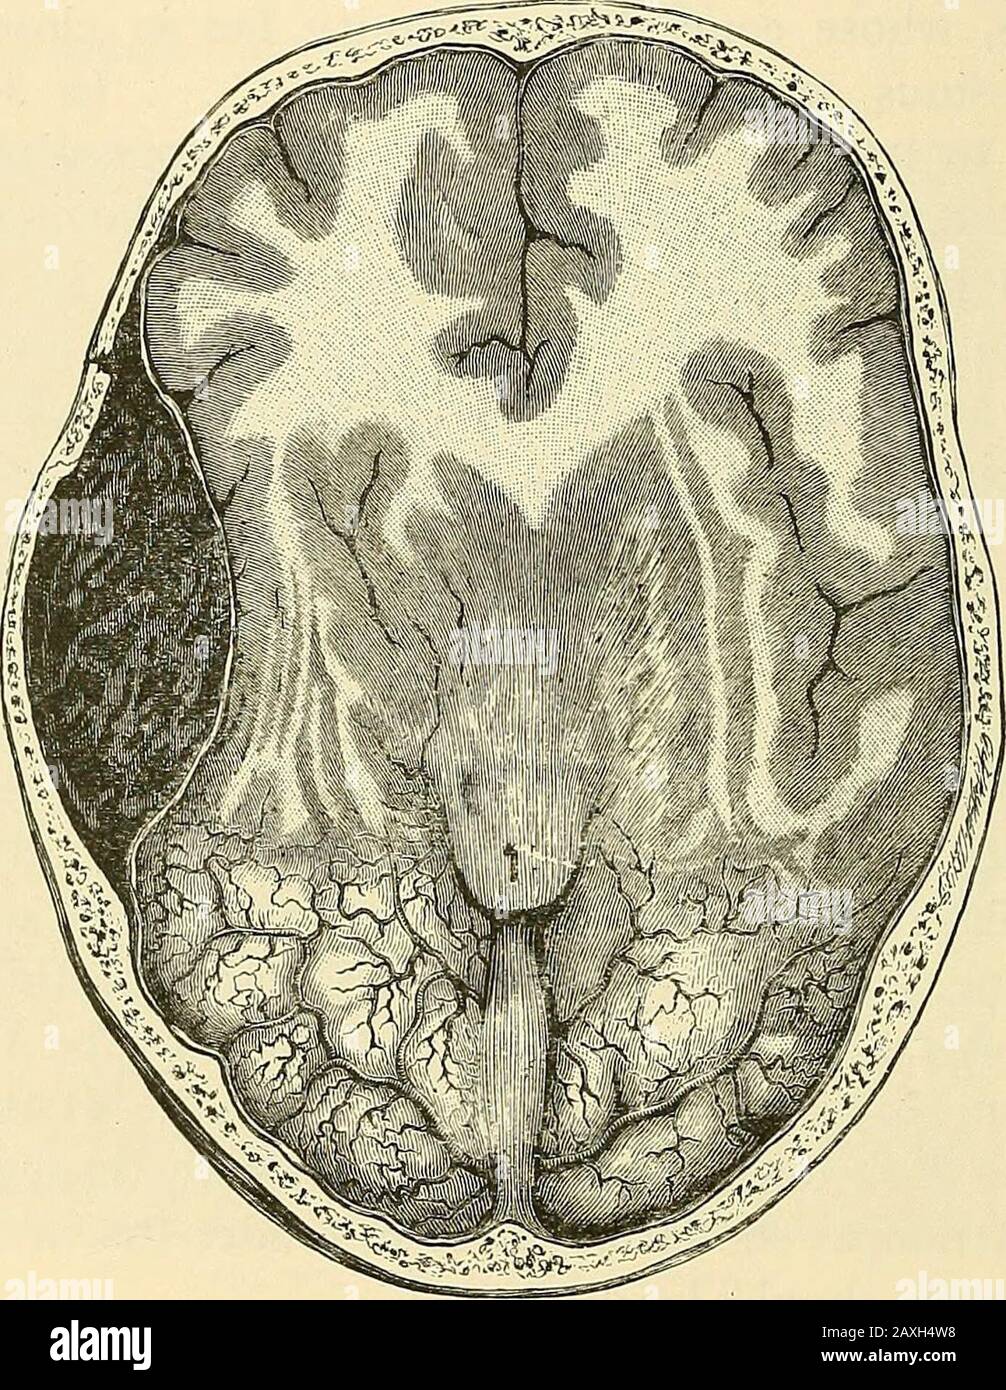 A manual of operative surgery . anyinjury to the dura itself this may be dealt with through the sameopening. Attempts should be made to render the cavity aseptic,and the wounds should be drained. The after-treatment is considered on page 44. 3. THE OPERATIVE TREATMENT OF INTRACRANIALHEMORRHAGE The whole subject of haemorrhage from the middle meningealartery has been thoroughly dealt with by Mr. Jacobson in a mostable article published in the Guys Hospital Reports for 1886.In the majority of cases the haemorrhage occurs from the middlemeningeal artery. Thus Prescott-Hewett (Holmess System 24 OP Stock Photo